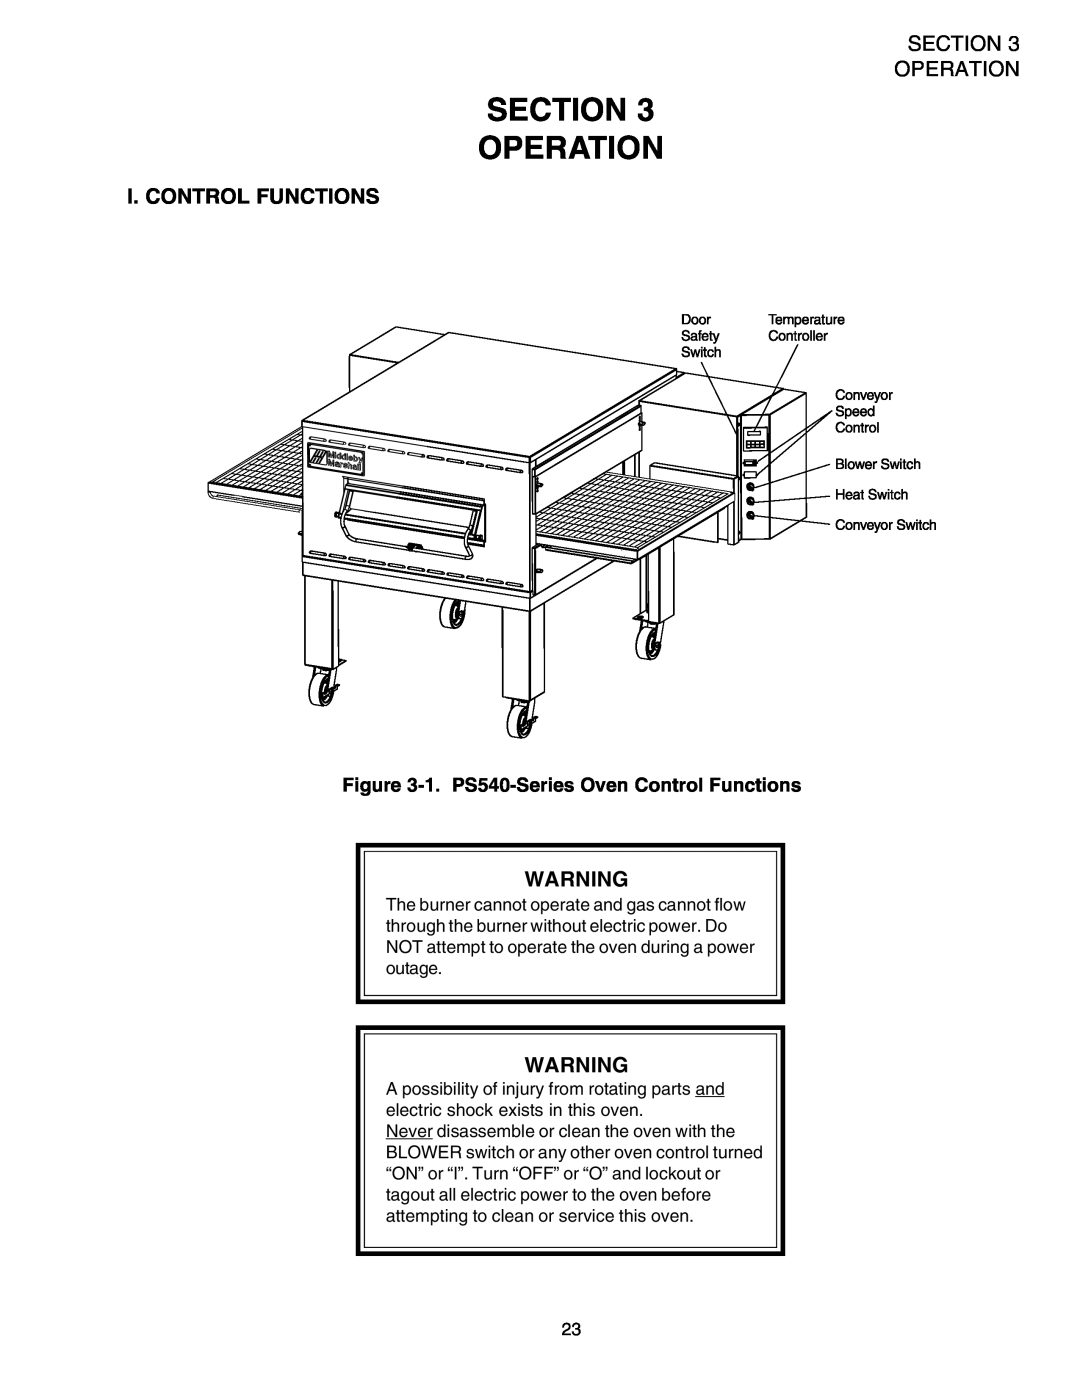 Middleby Marshall PS540 installation manual Section Operation, I. Control Functions 